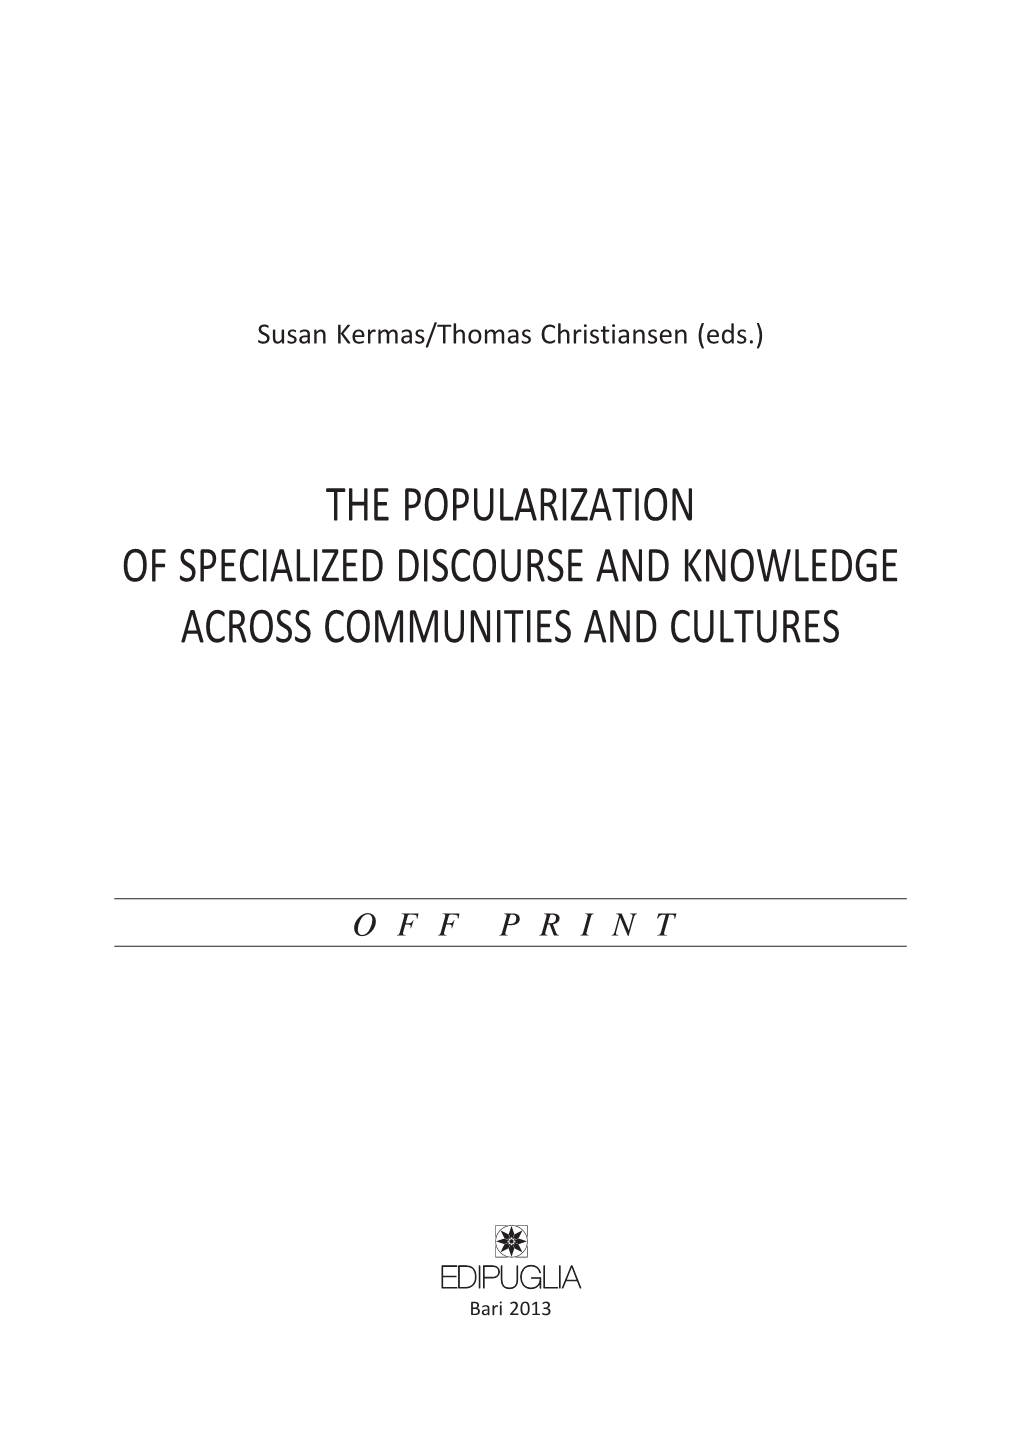 The Popularization of Specialized Discourse and Knowledge Across Communities and Cultures